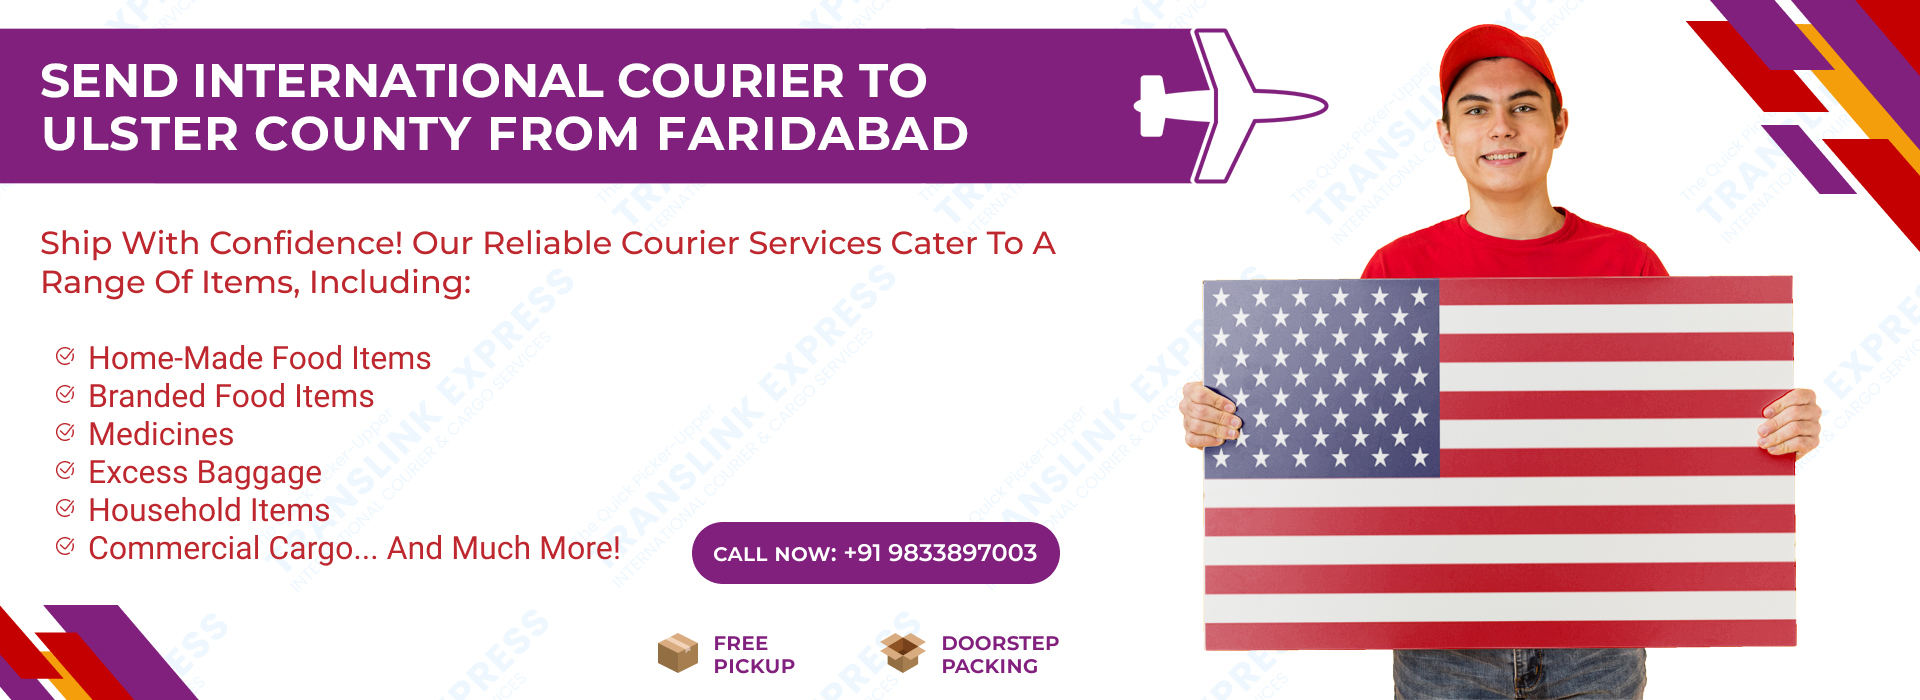 Courier to Ulster County From Faridabad